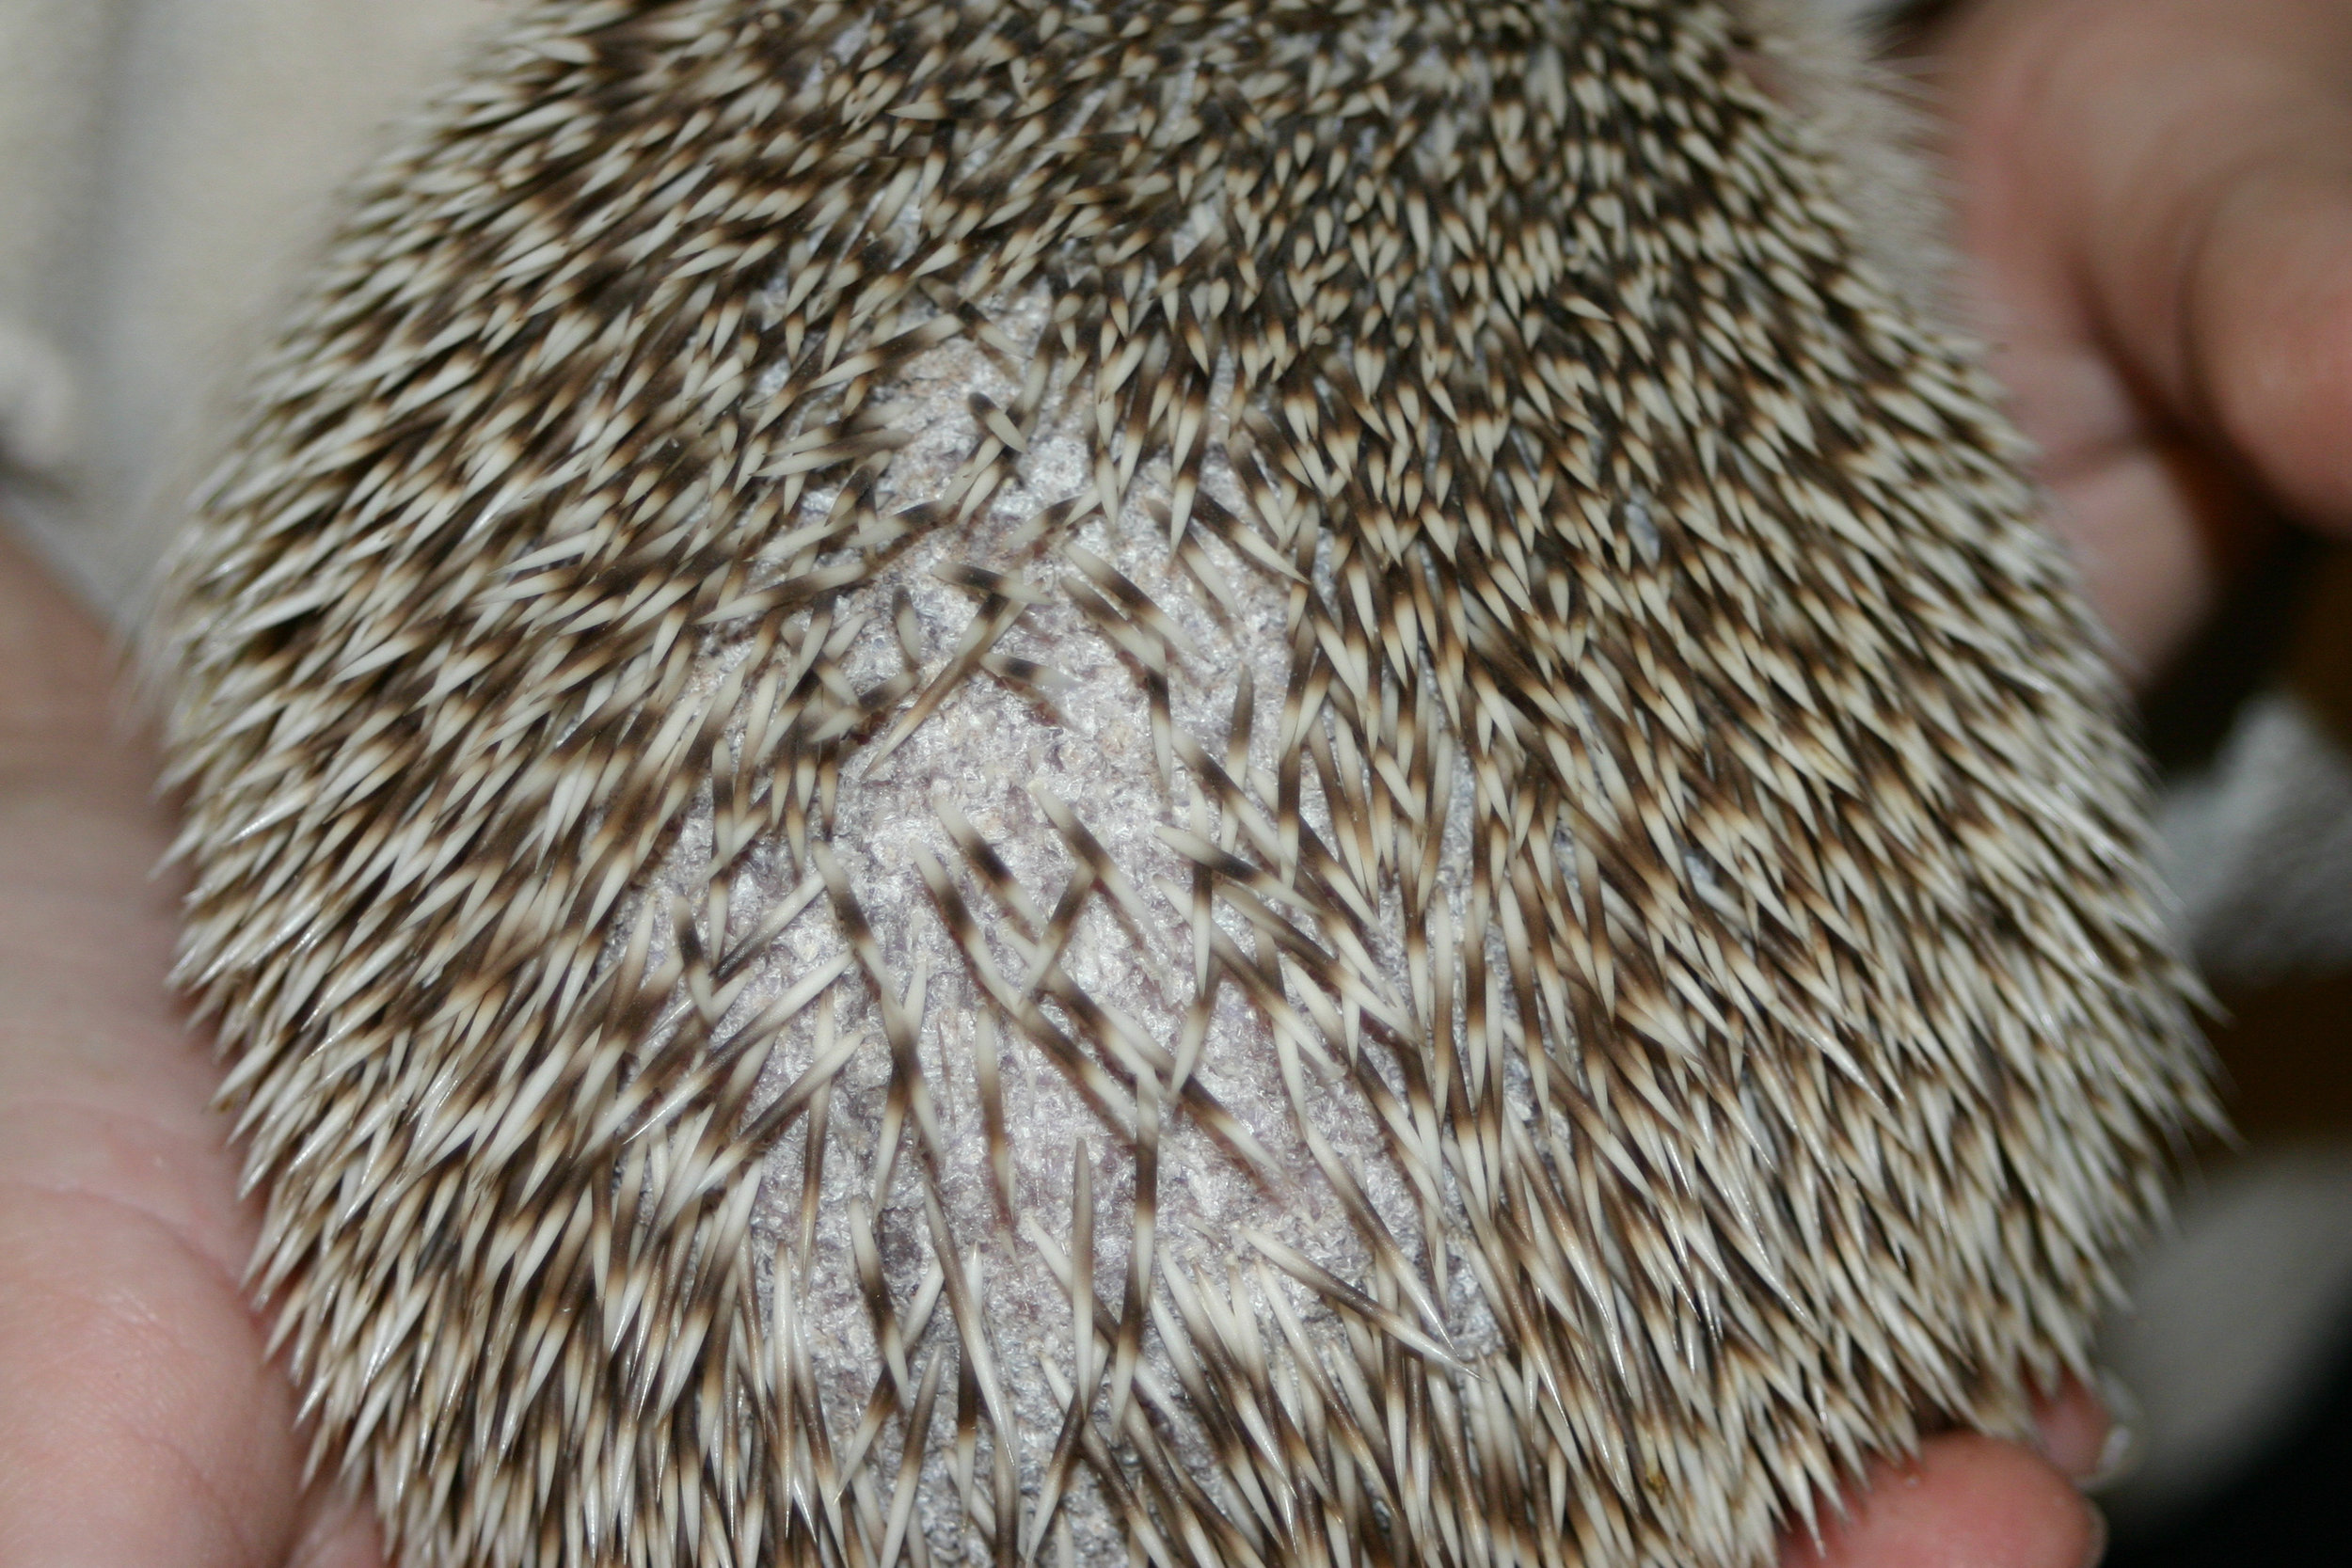 Quill loss due to mites